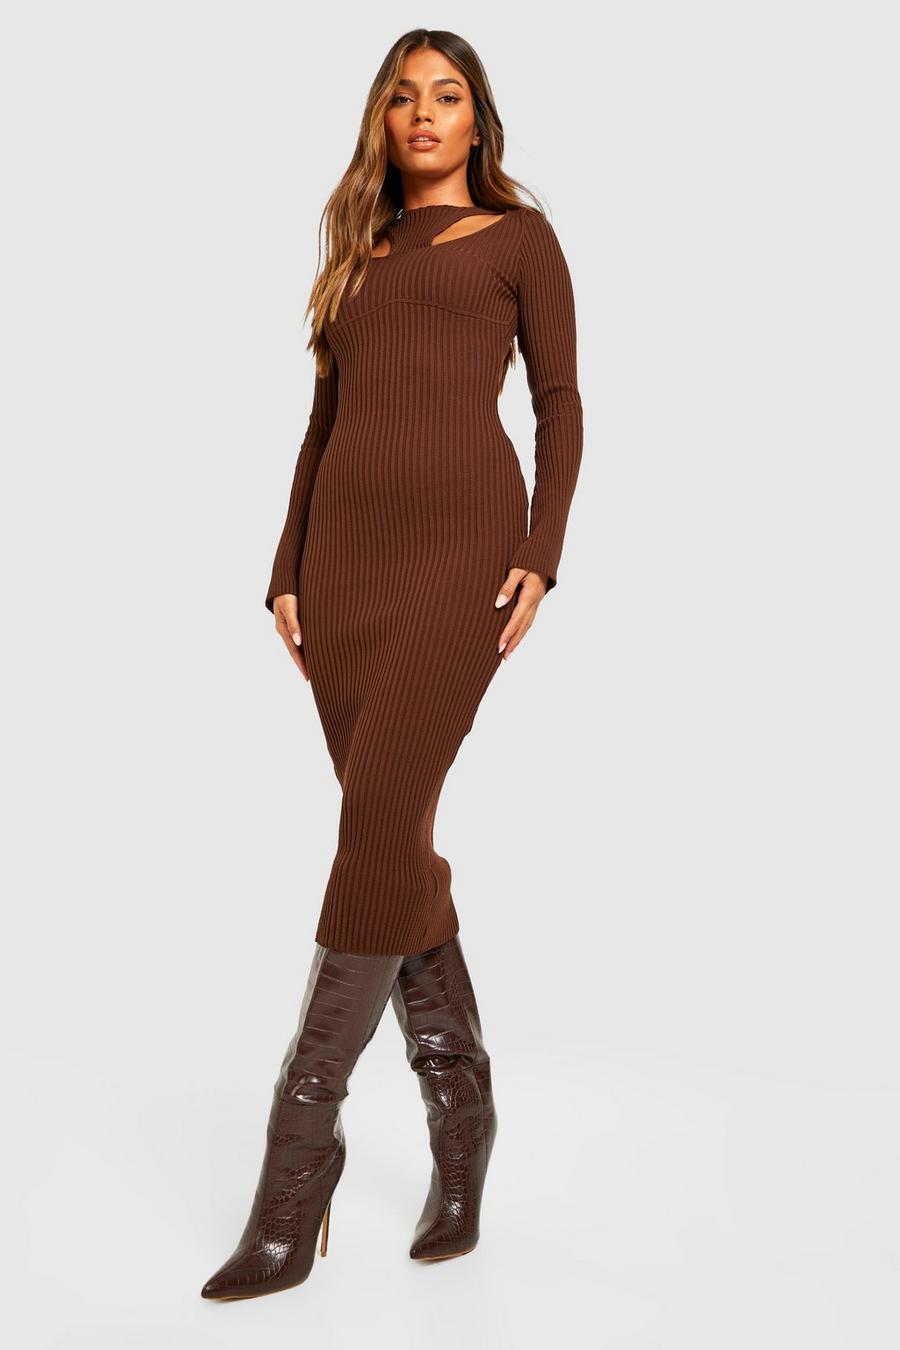 Chocolate brown Cut Out Neckline Rib Knitted Dress